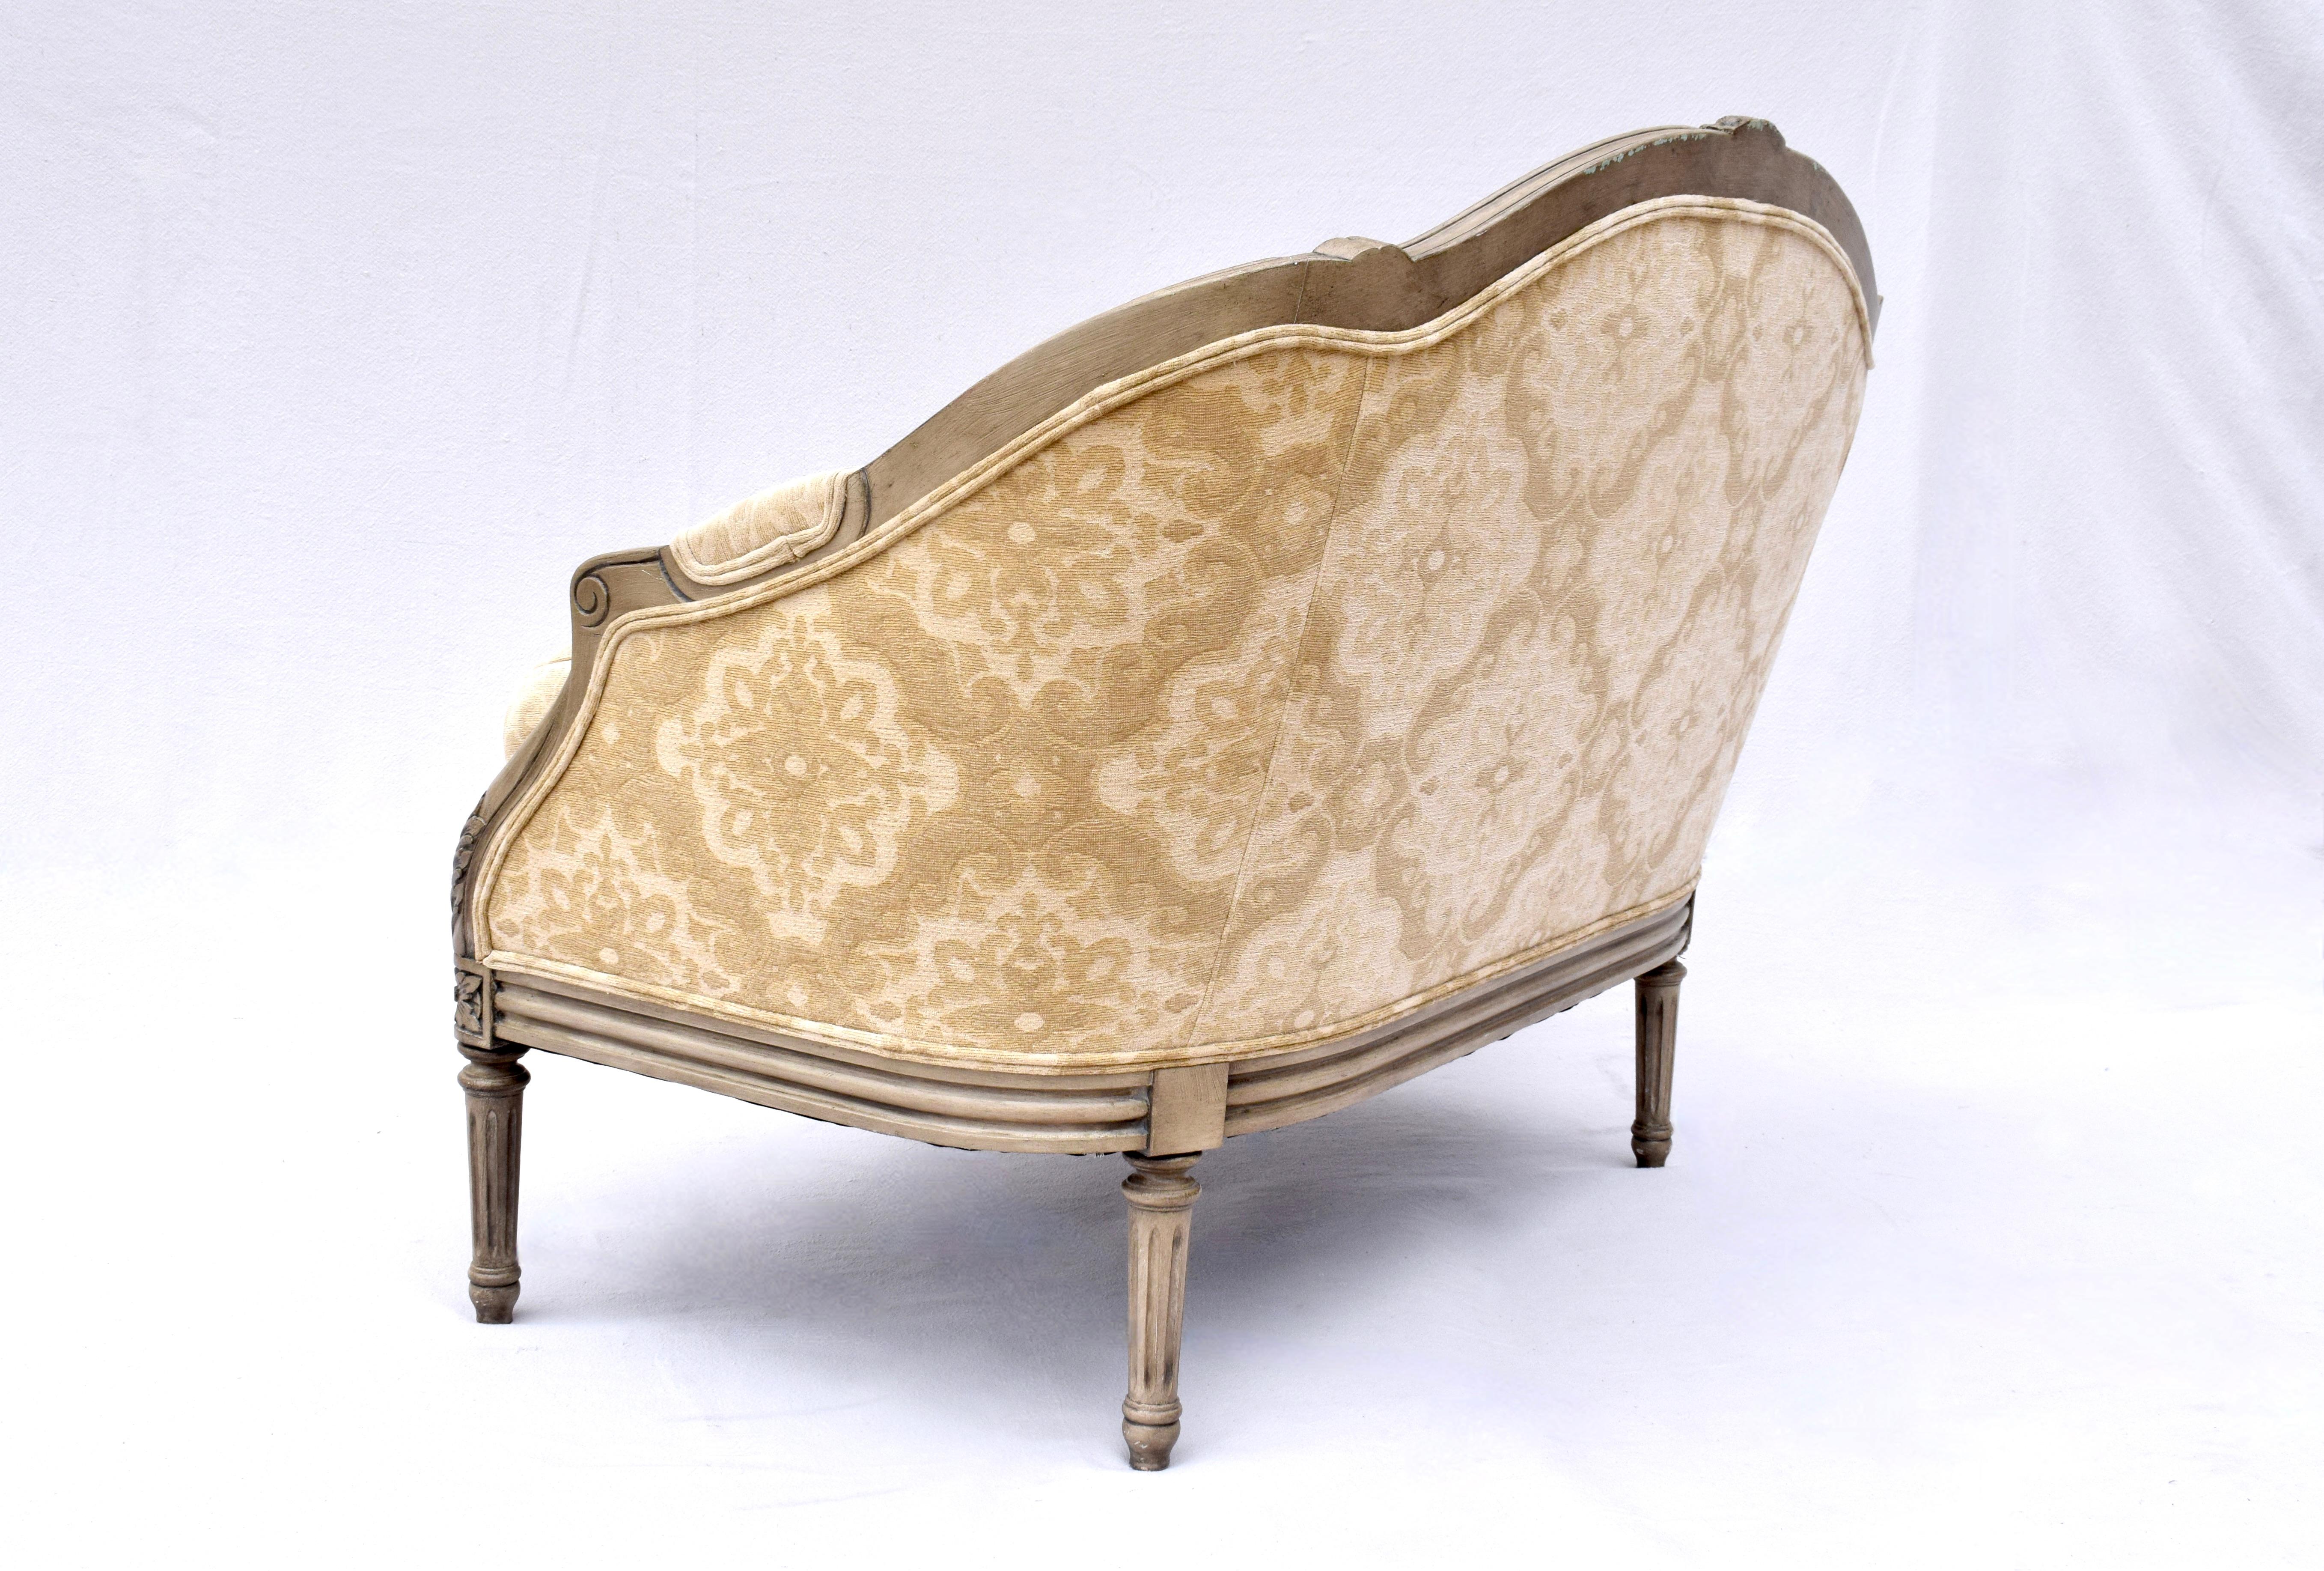 French Louis XvI Style Marquise Chair & Ottoman For Sale 1